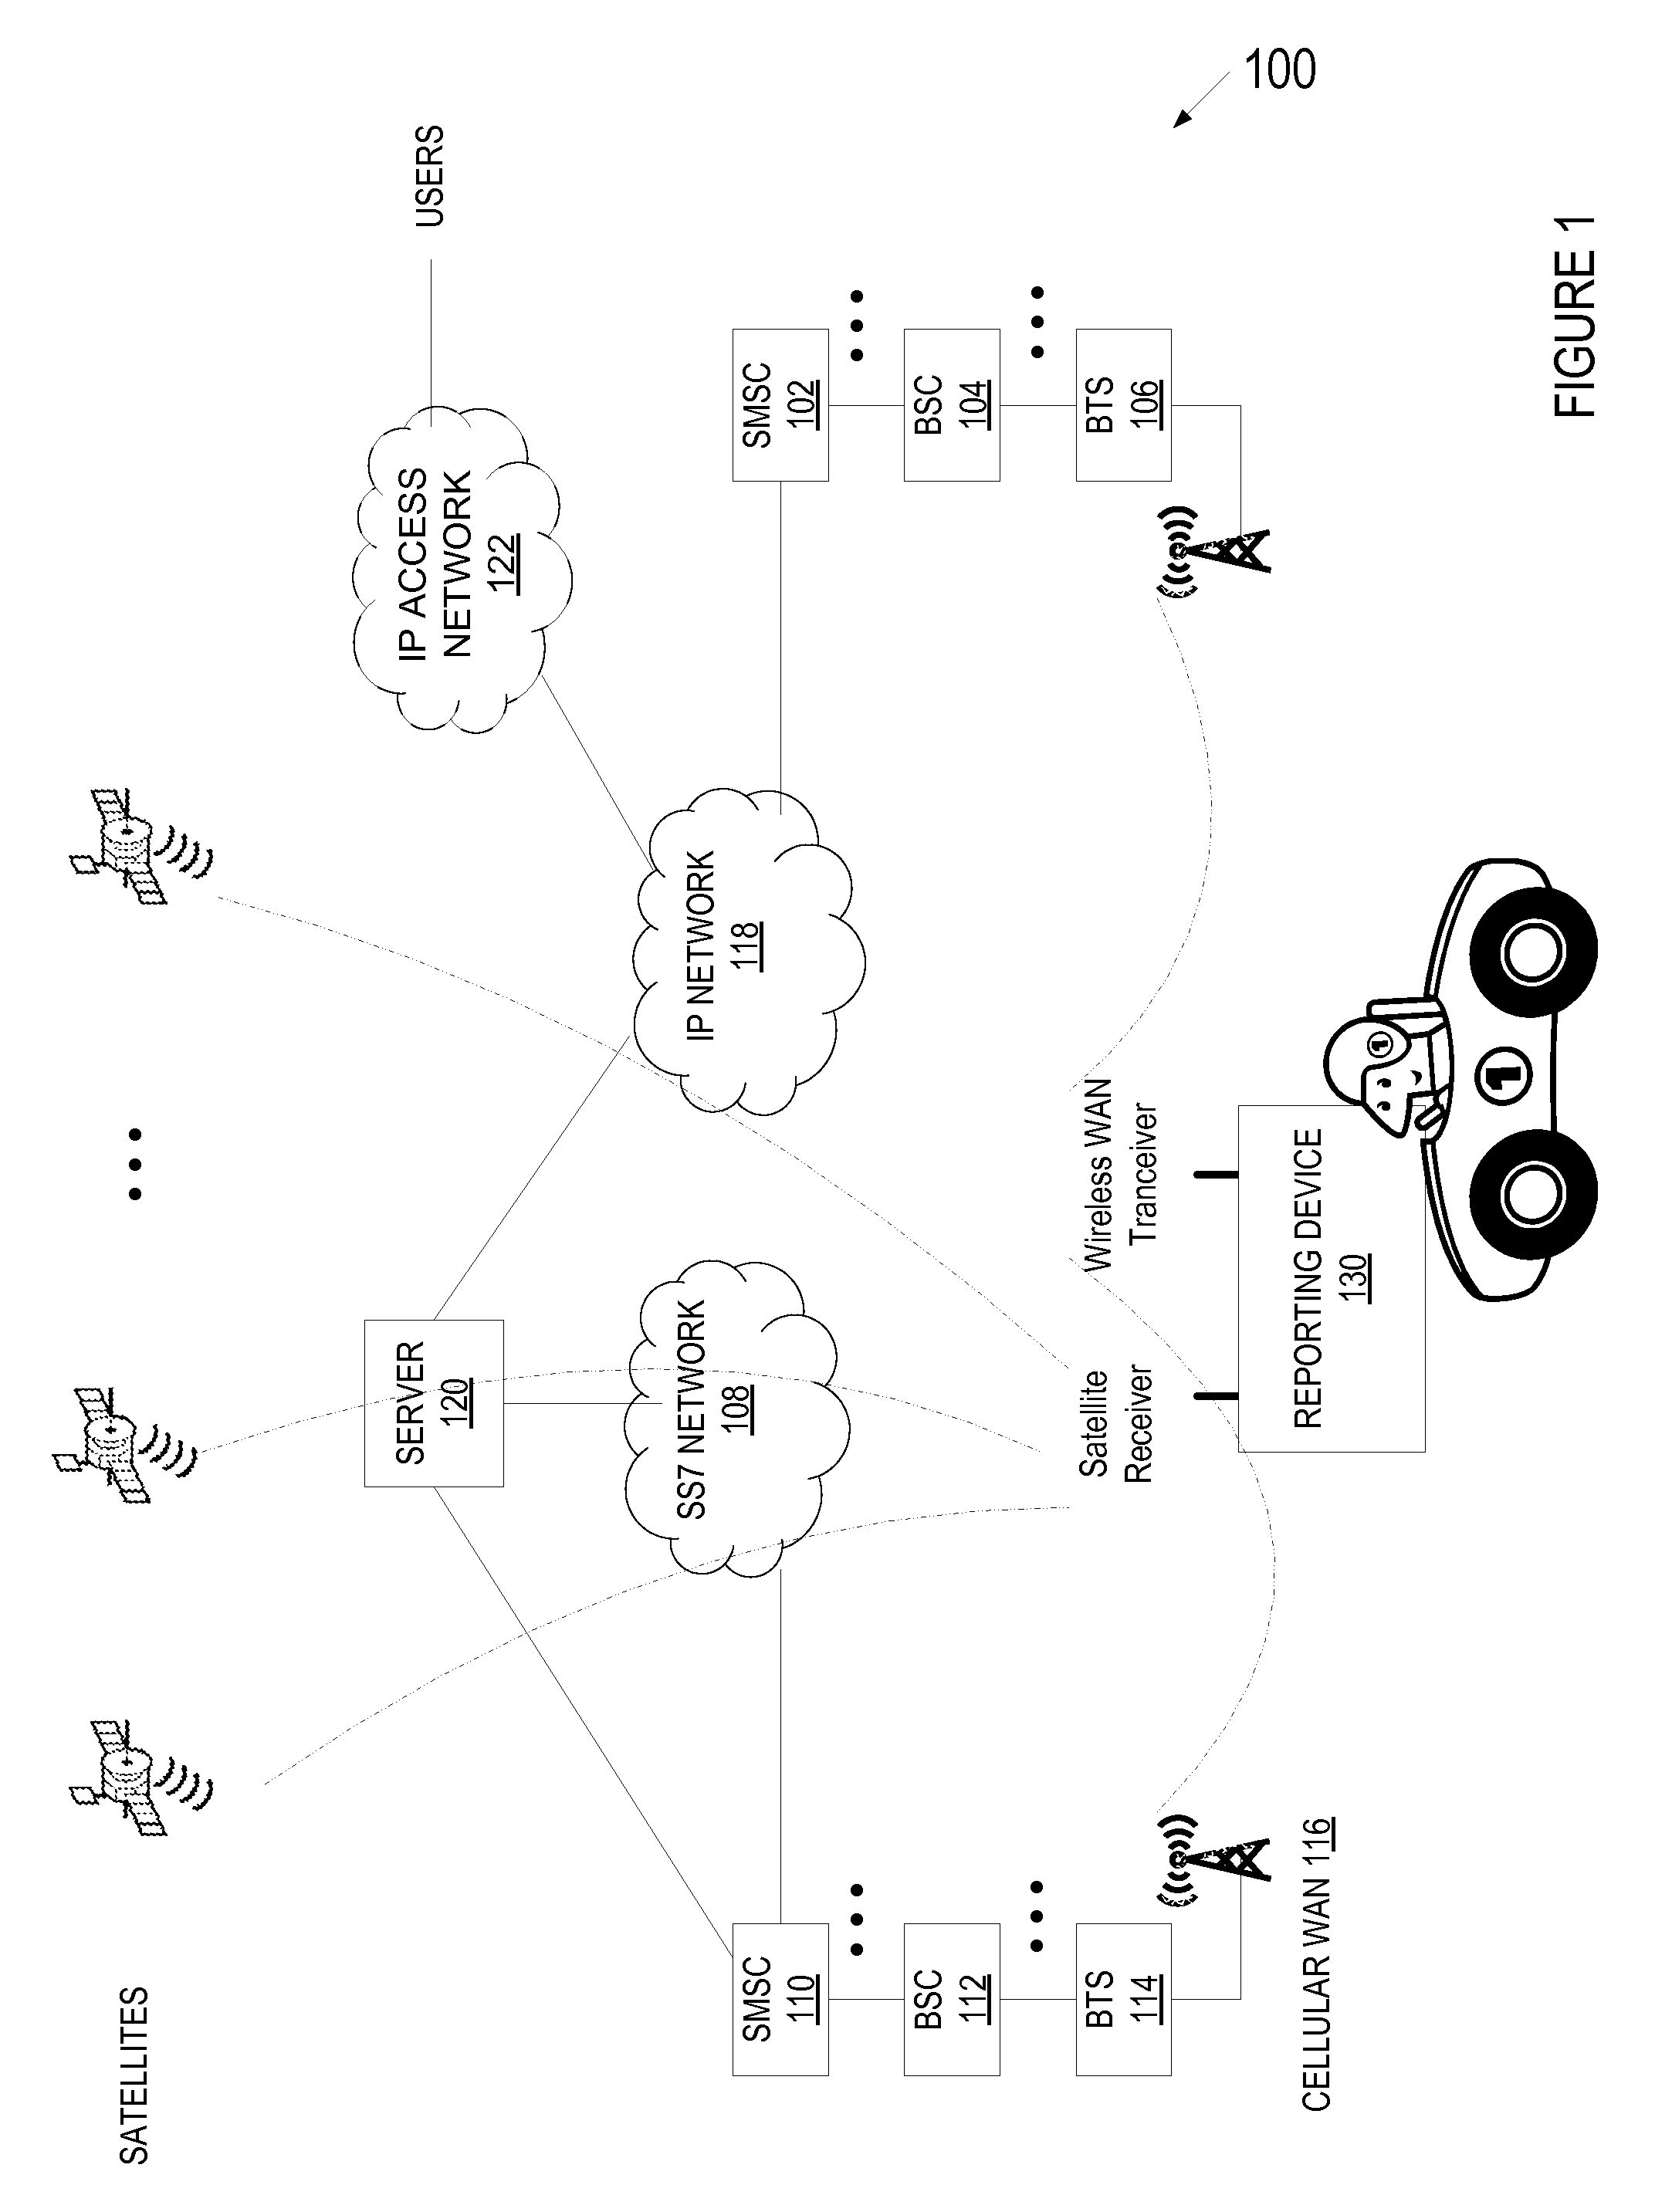 Methods, Apparatuses and Systems for the Reporting of Roadway Speed and Incident Data and the Constructing of Speed Map Database